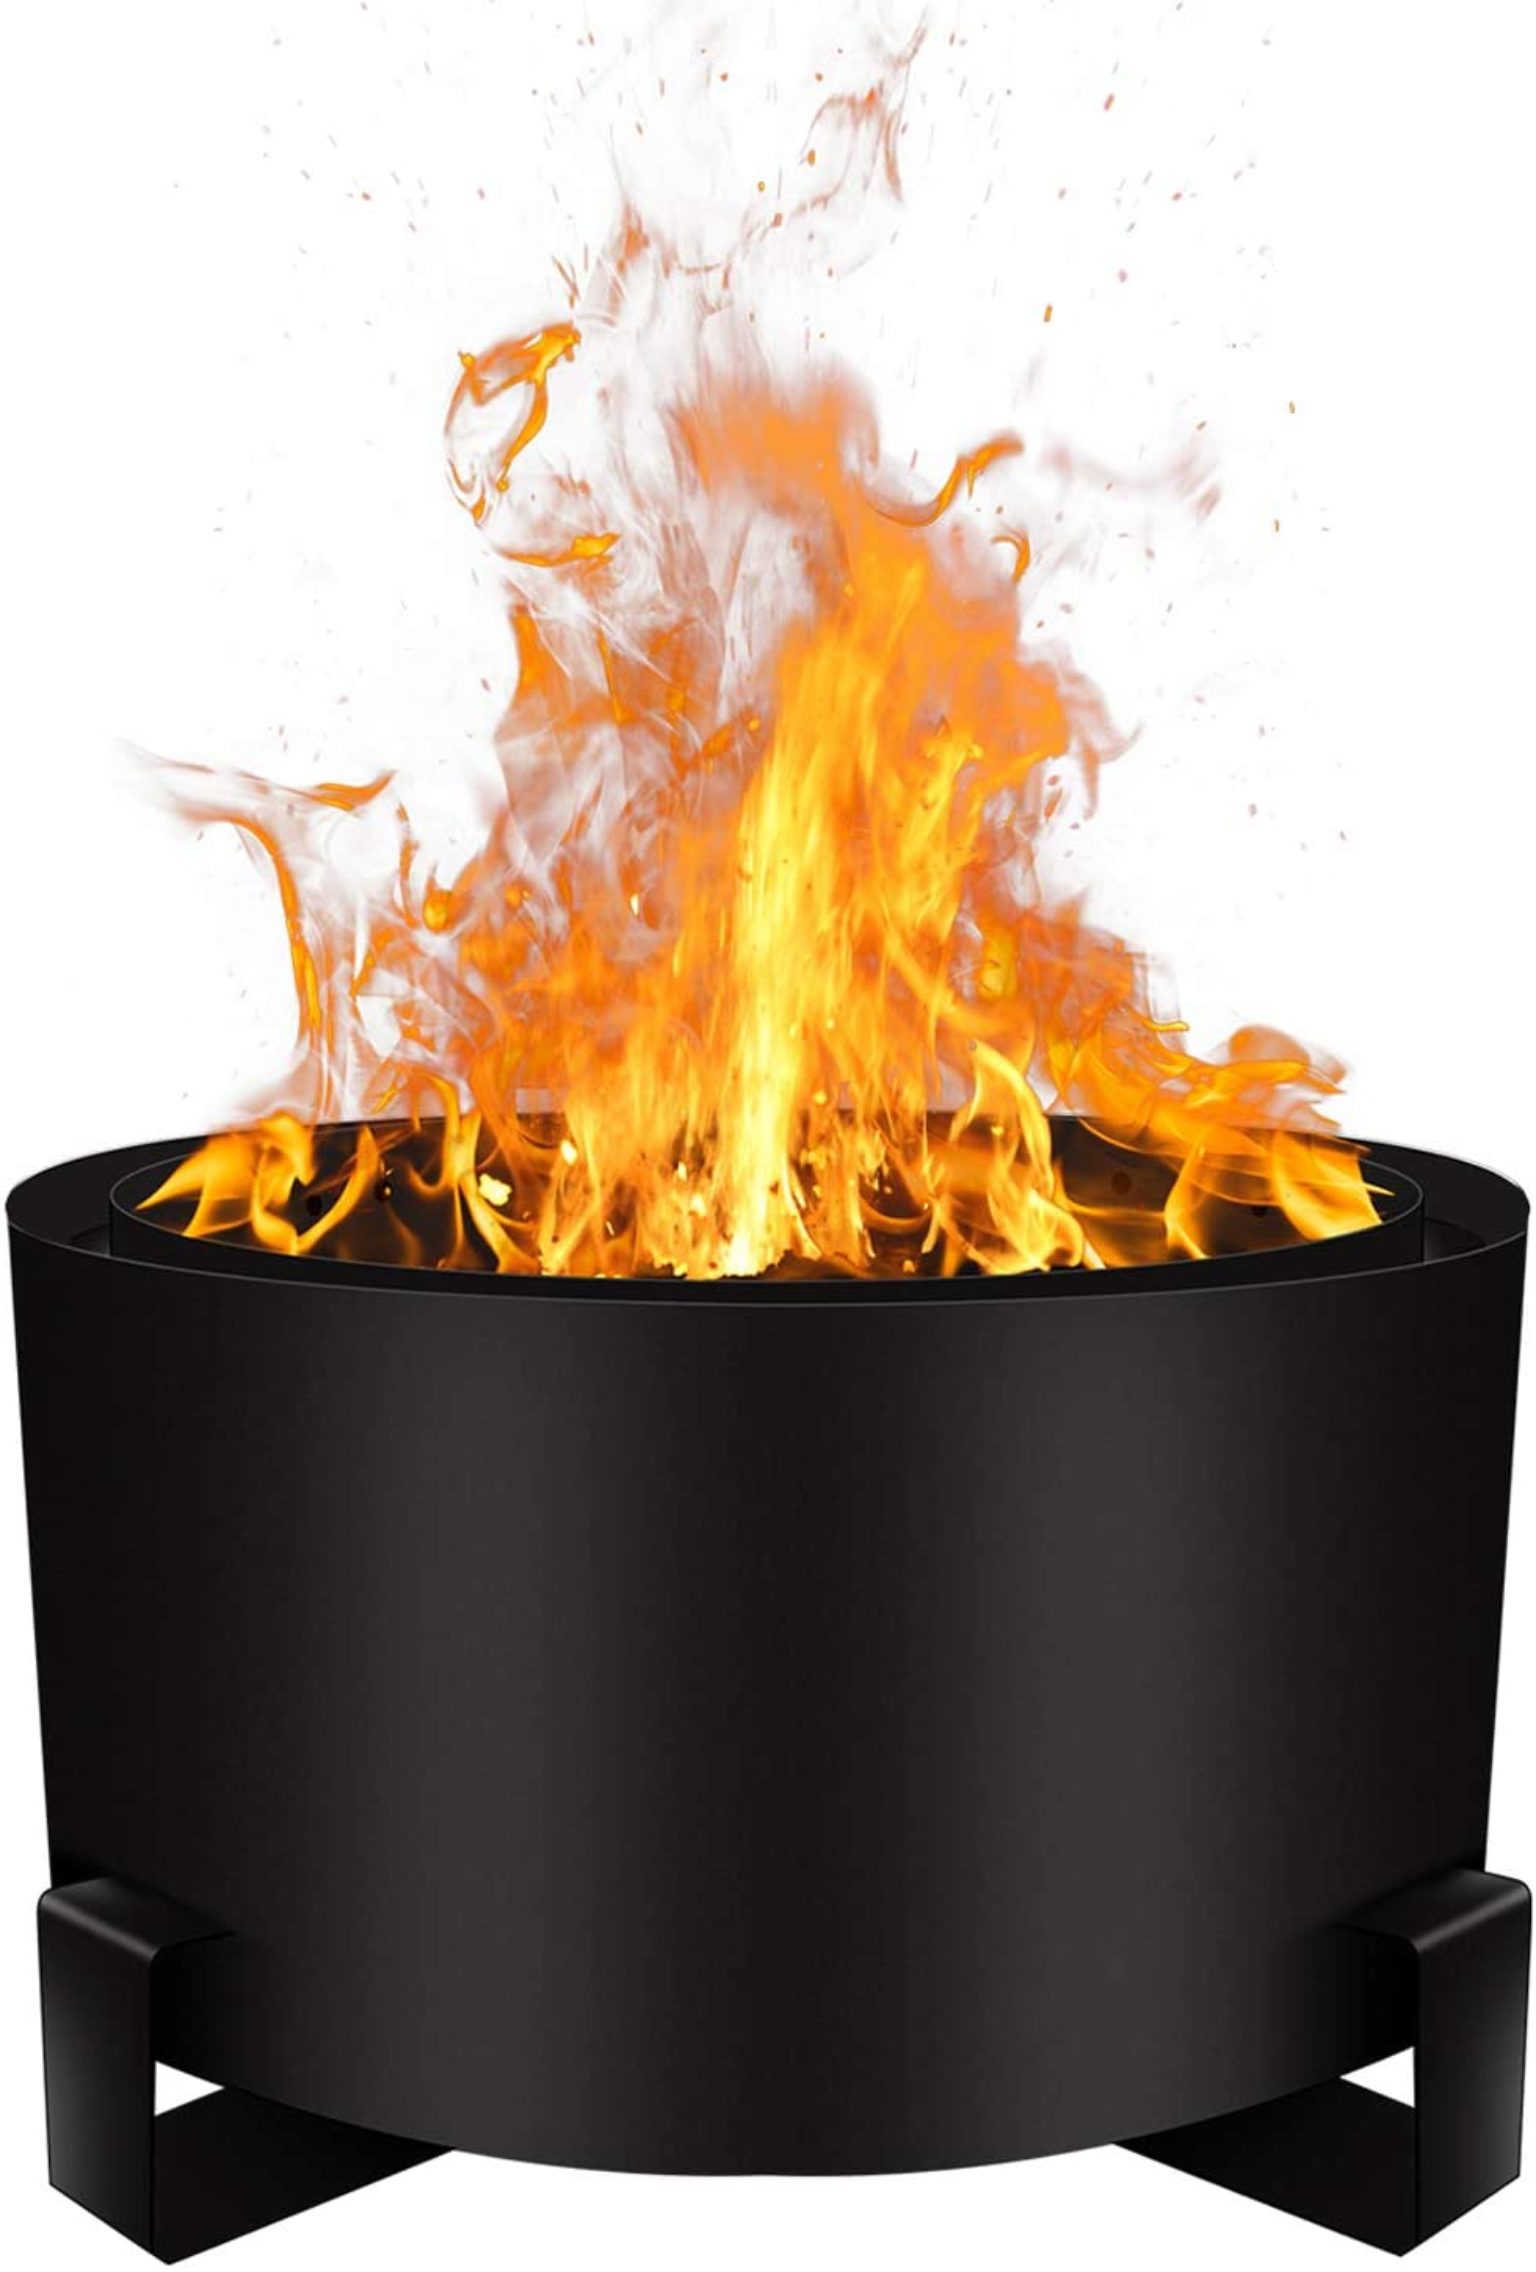 Check Out The 6 Best Outdoor Fire Pits For Under $300 | The Daily Caller